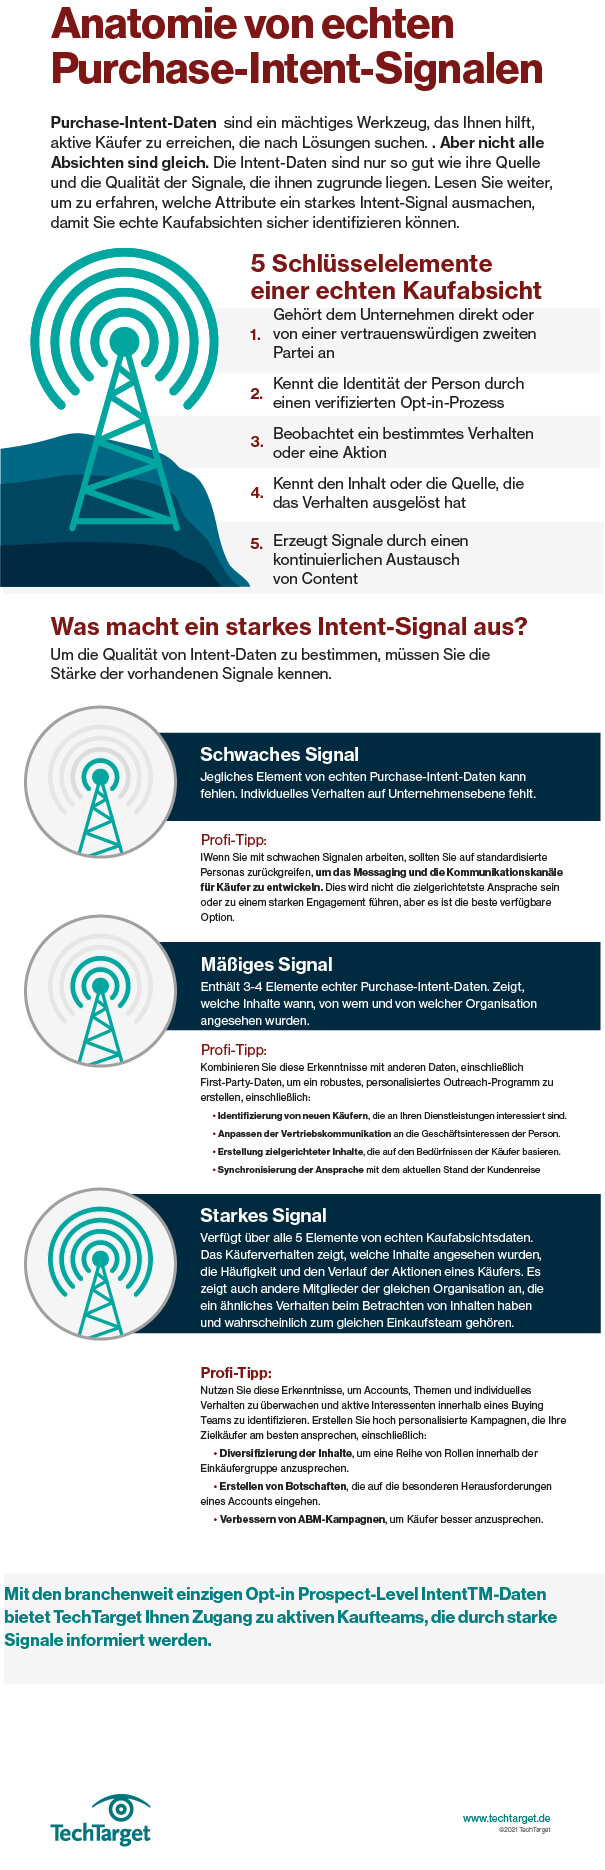 TTGT_Anatomy_of_a_Strong_Purchase_Intent_Signal_Infographic_DE_Blog_JPG